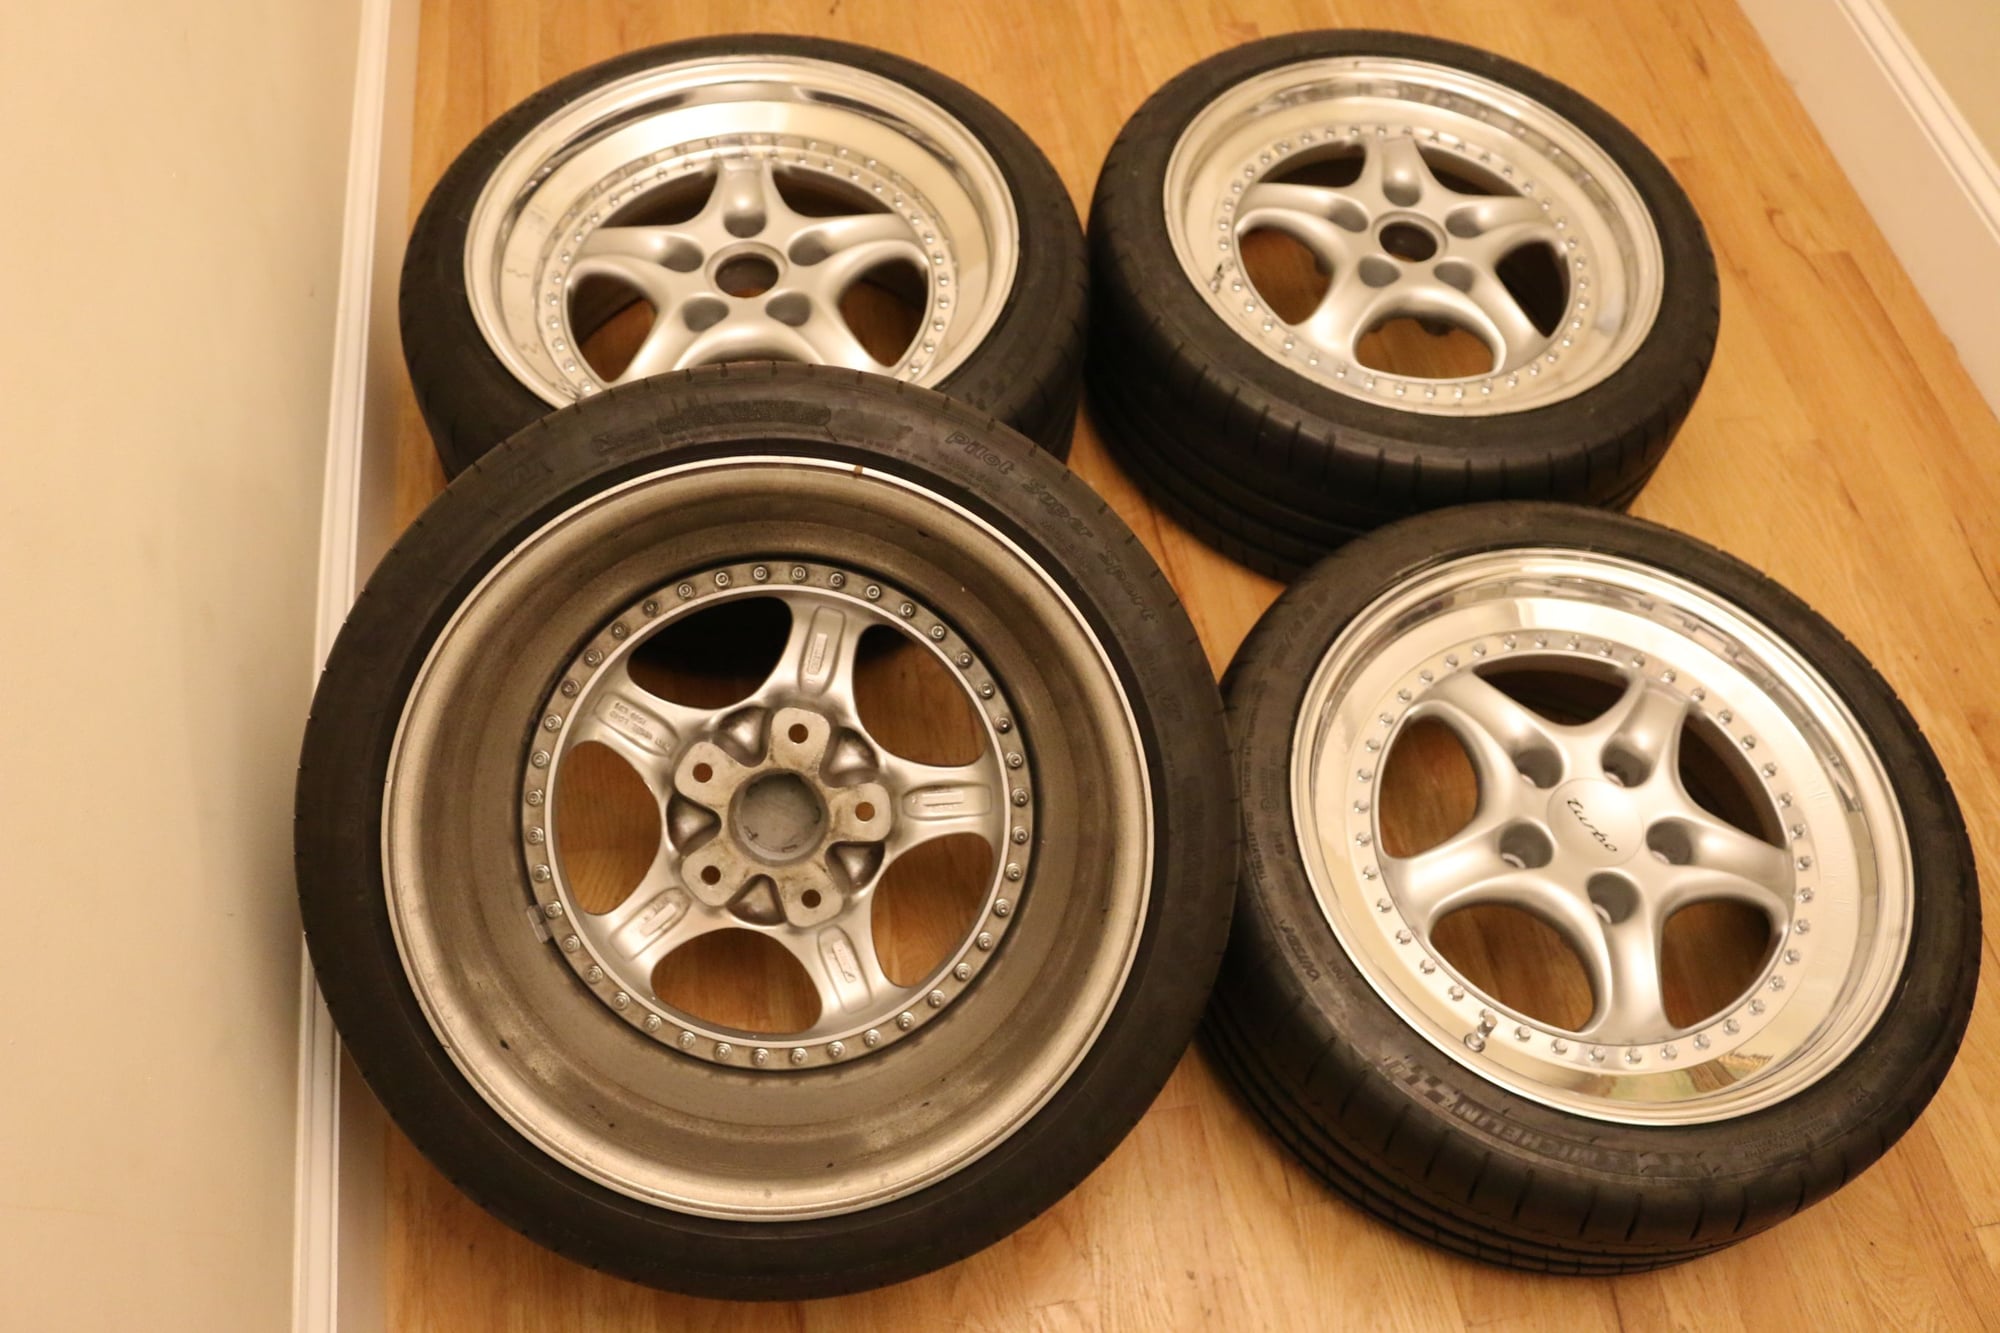 Wheels and Tires/Axles - Porsche Kinesis Supercup wheels 18x8 and 10 early offset - Used - Atlanta, GA 30071, United States